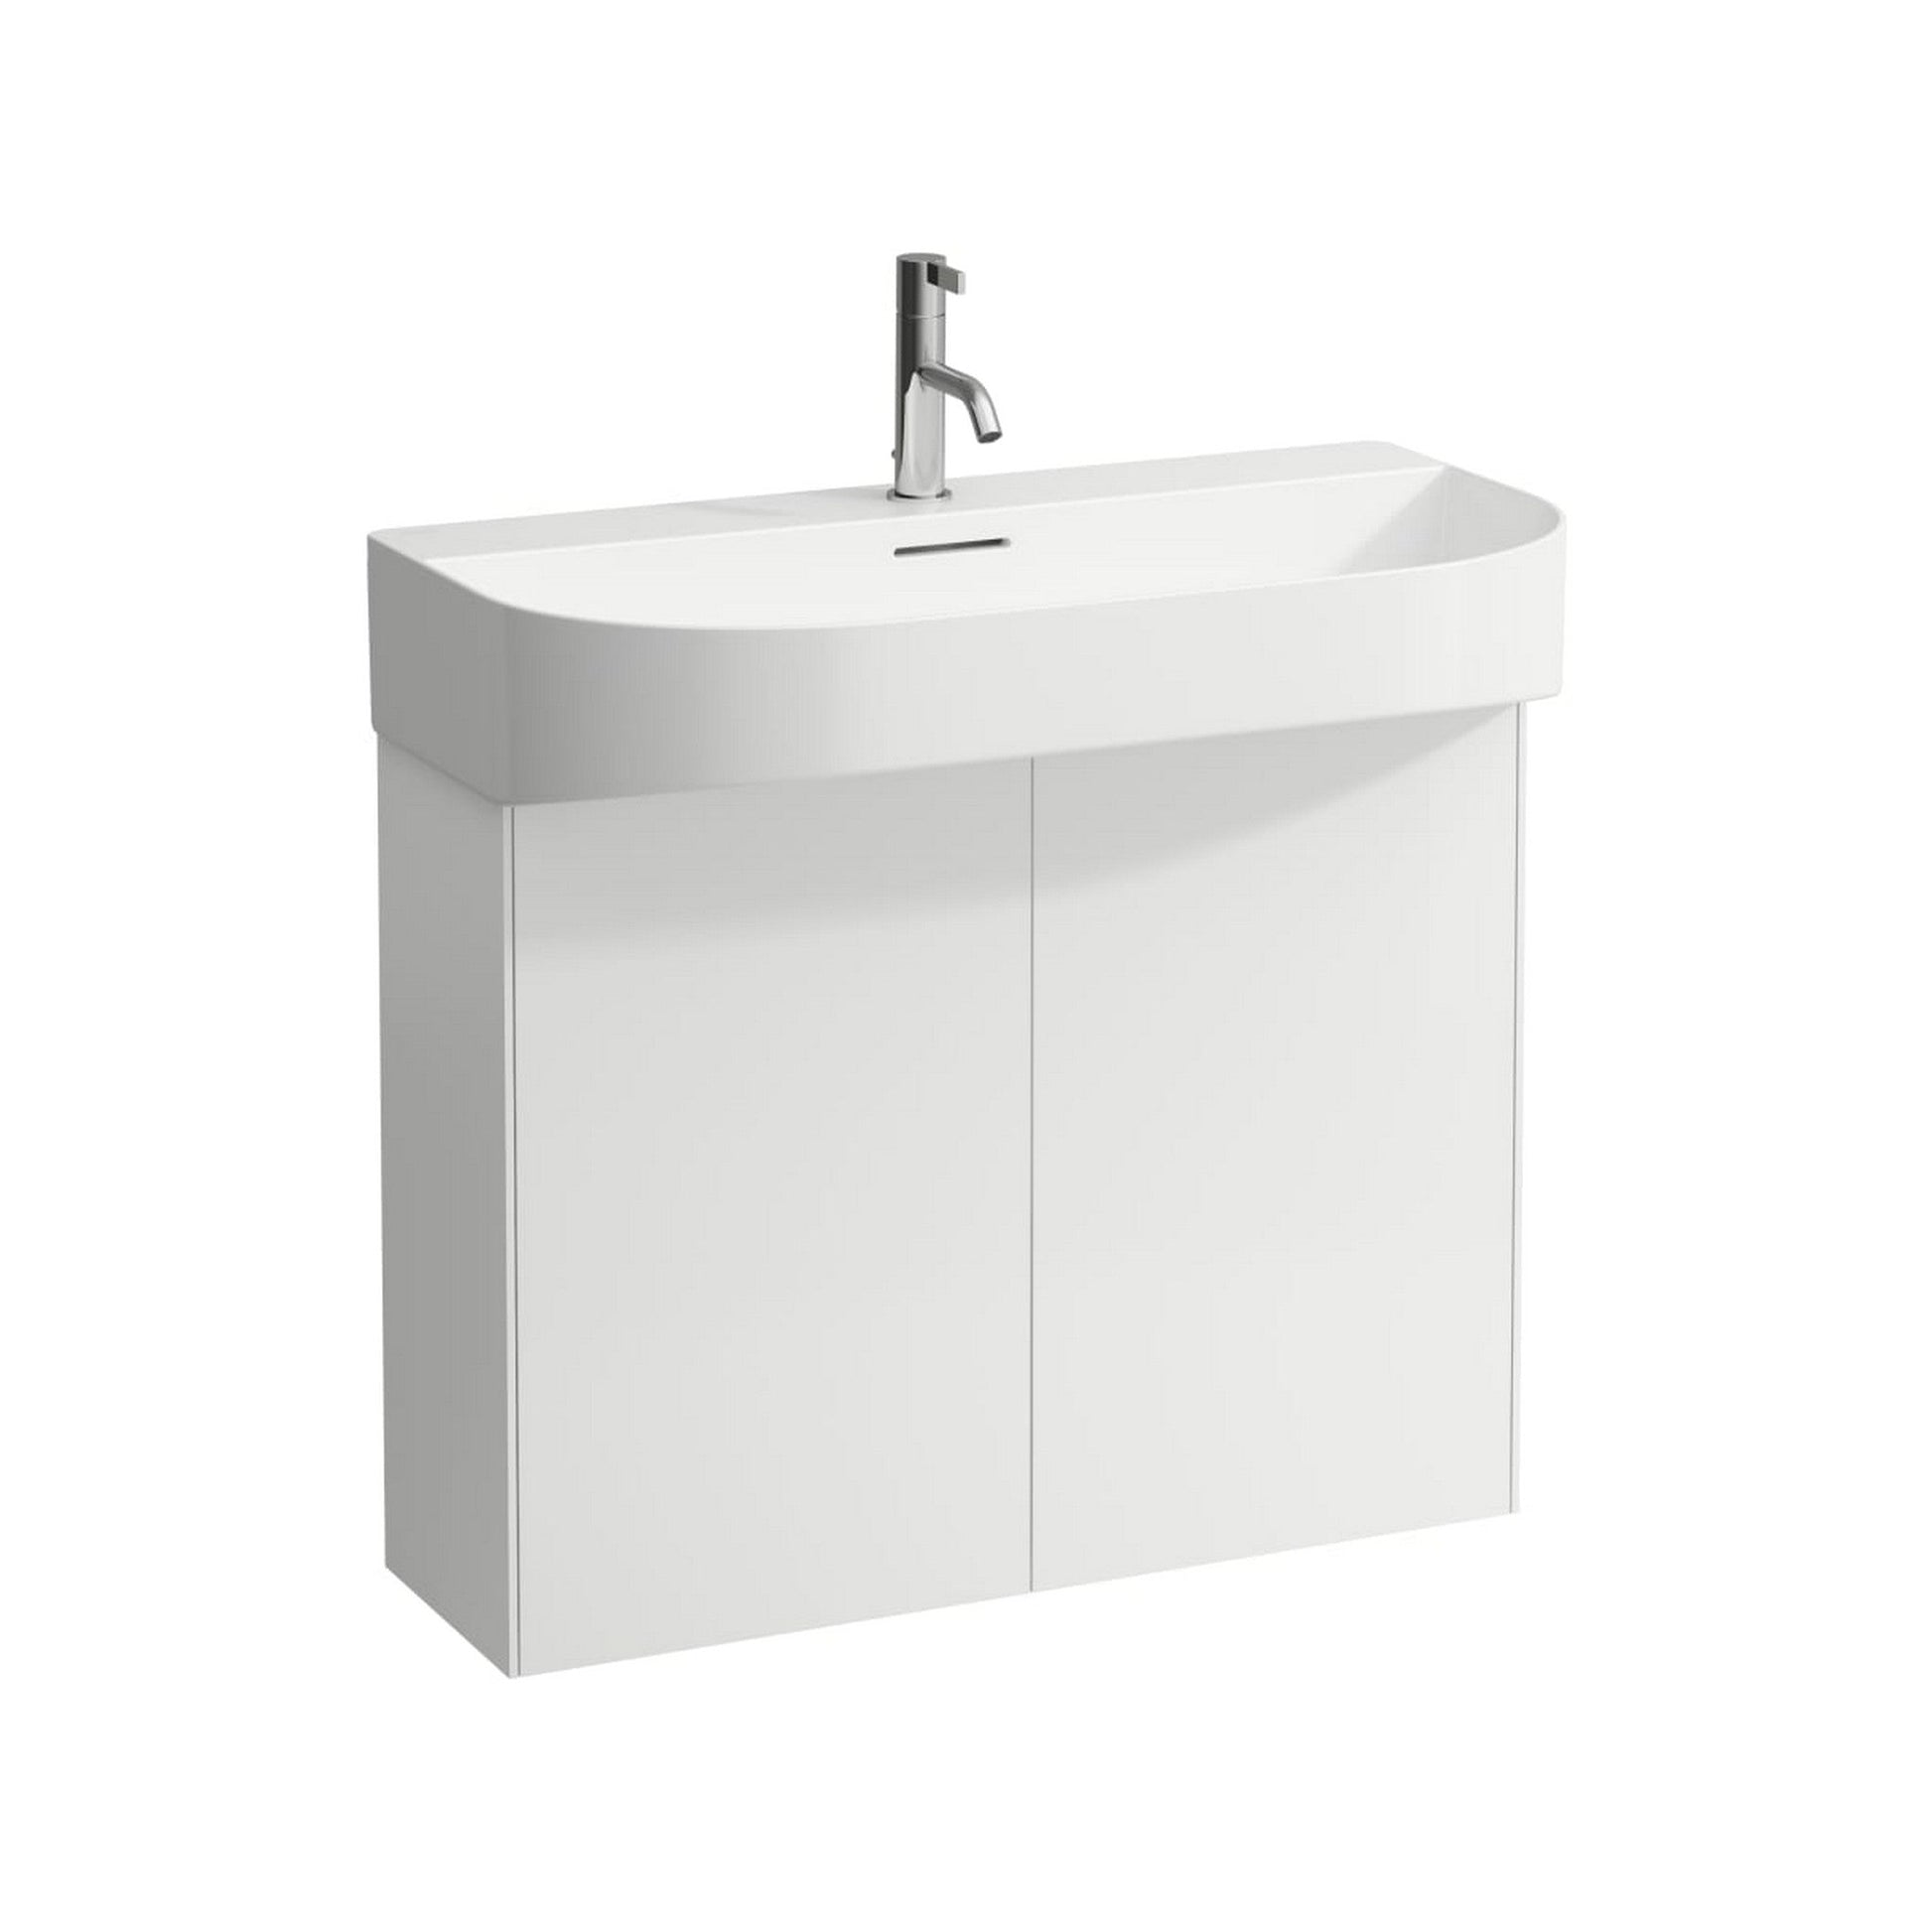 Laufen Sonar 32" White Ceramic Wall-Mounted Bathroom Sink With Faucet Hole